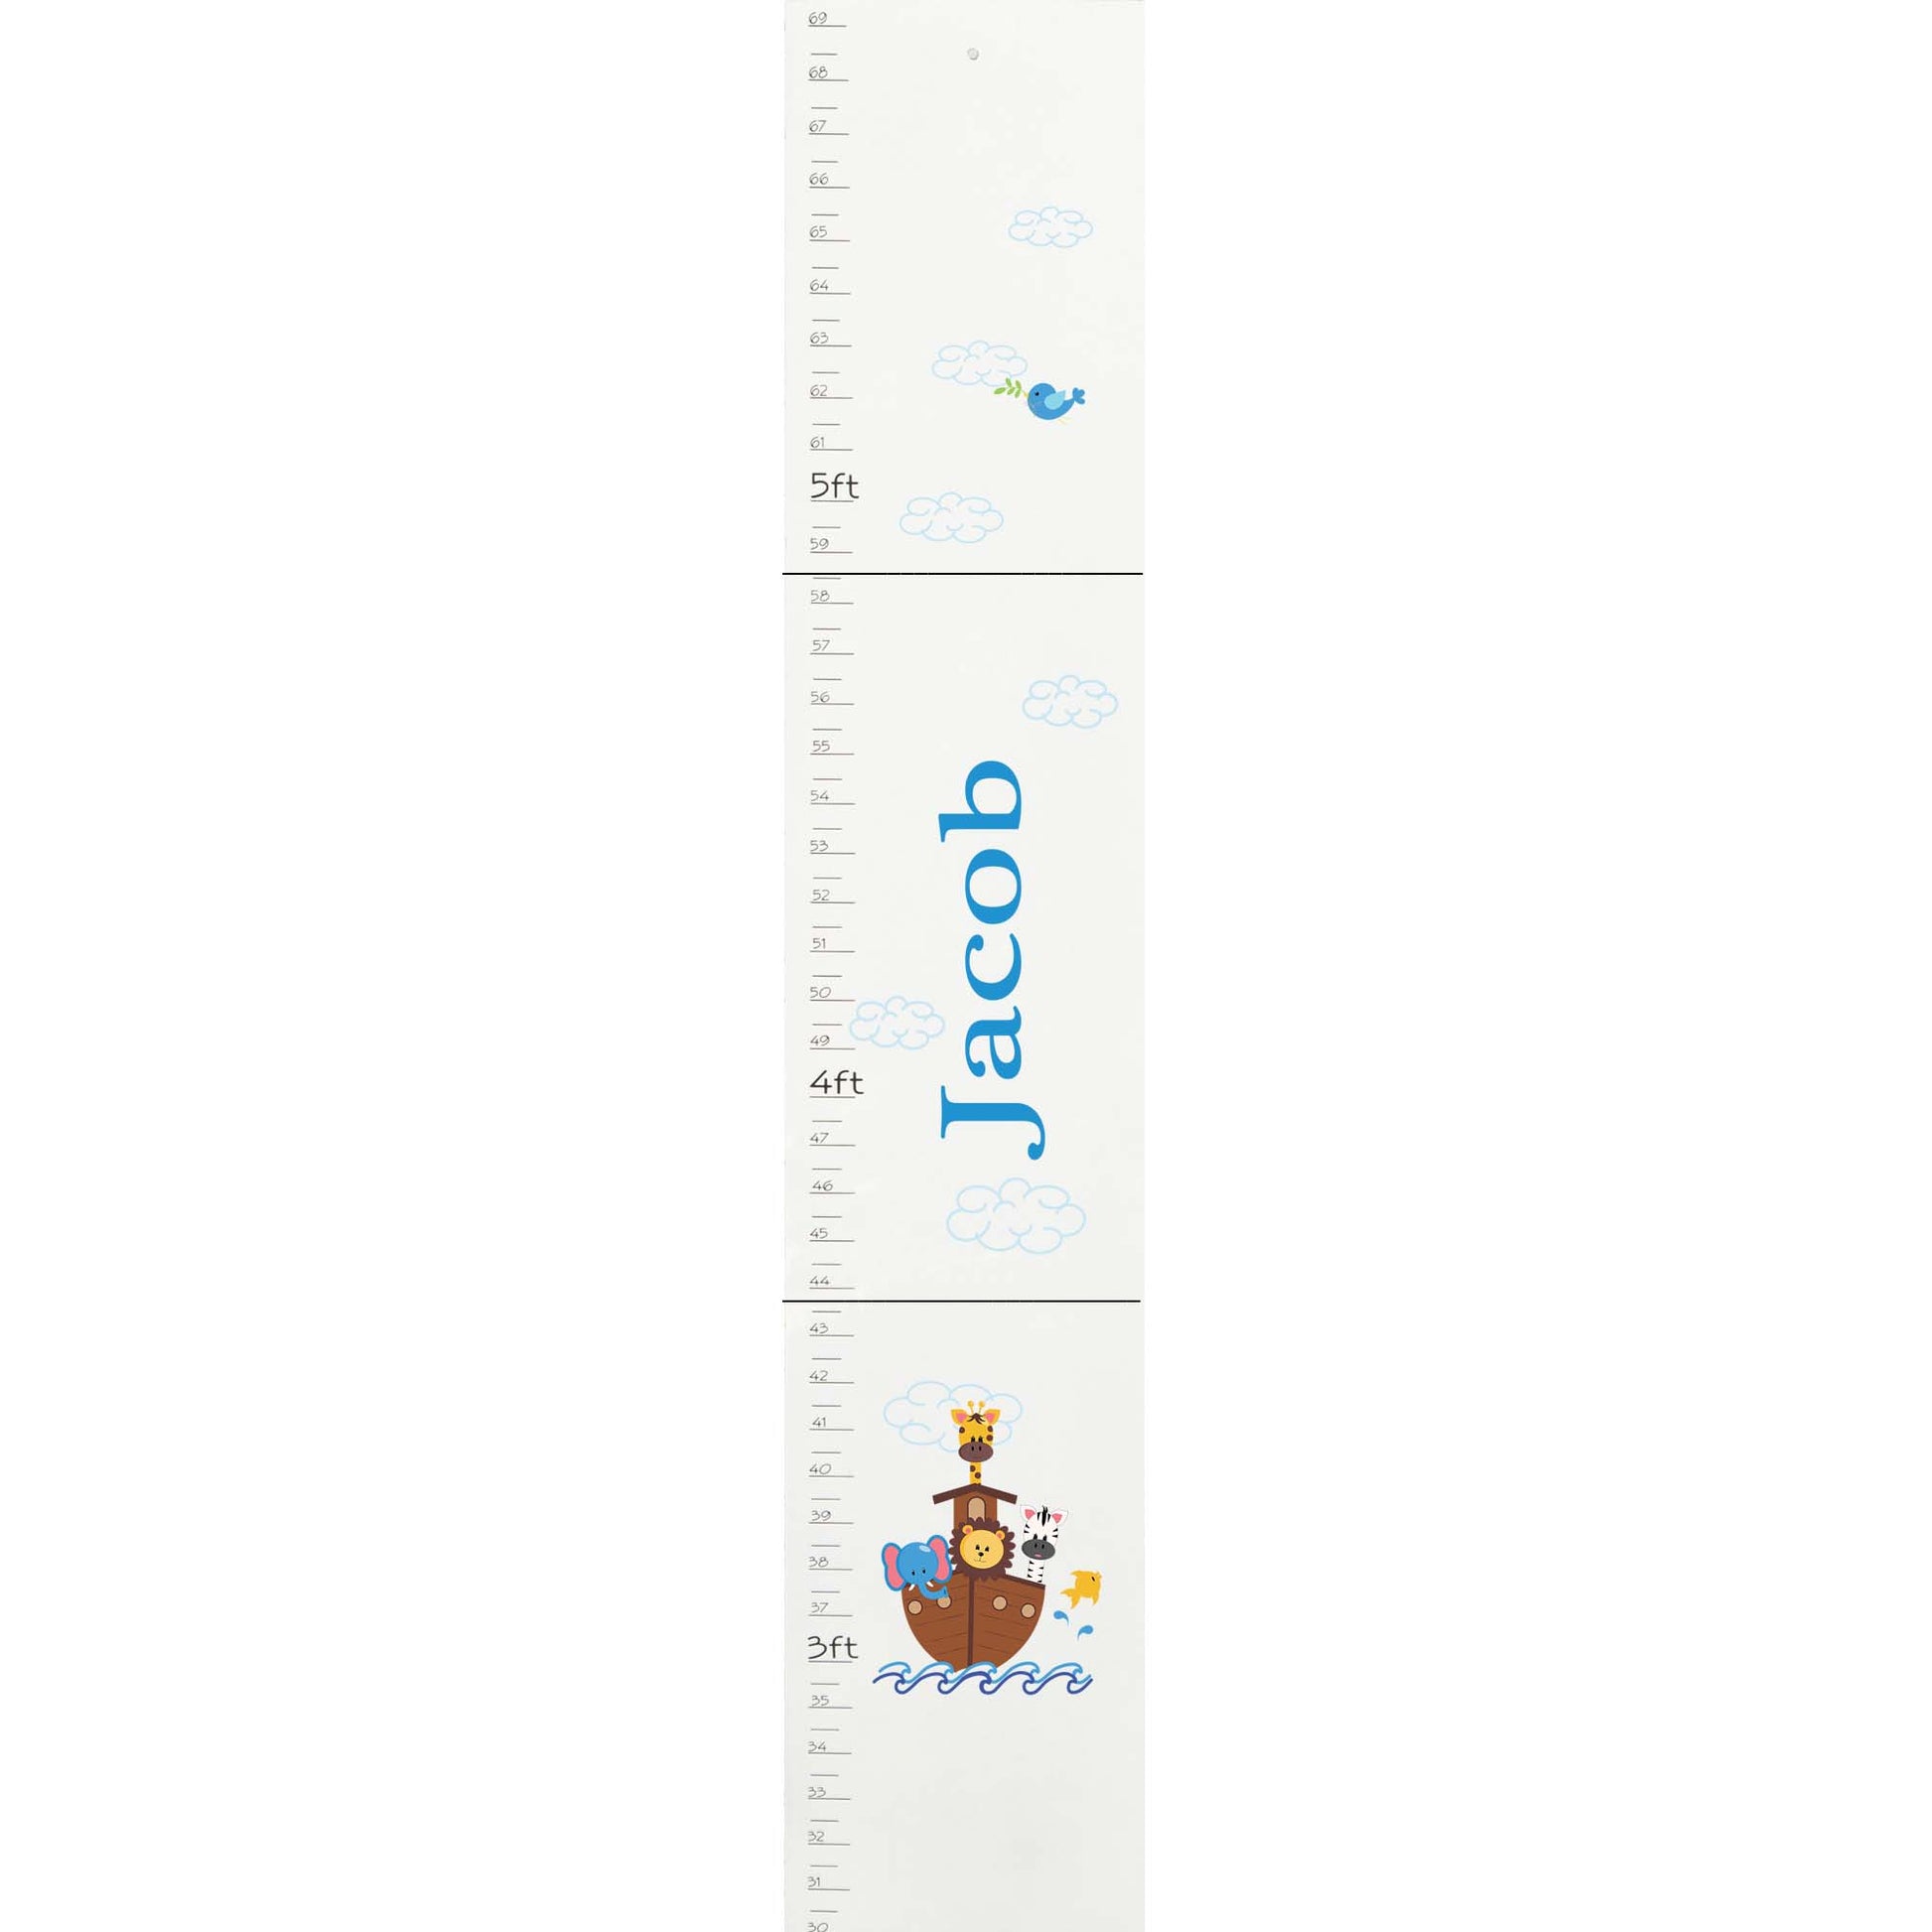 Personalized White Growth Chart With Noah's Ark Design Design